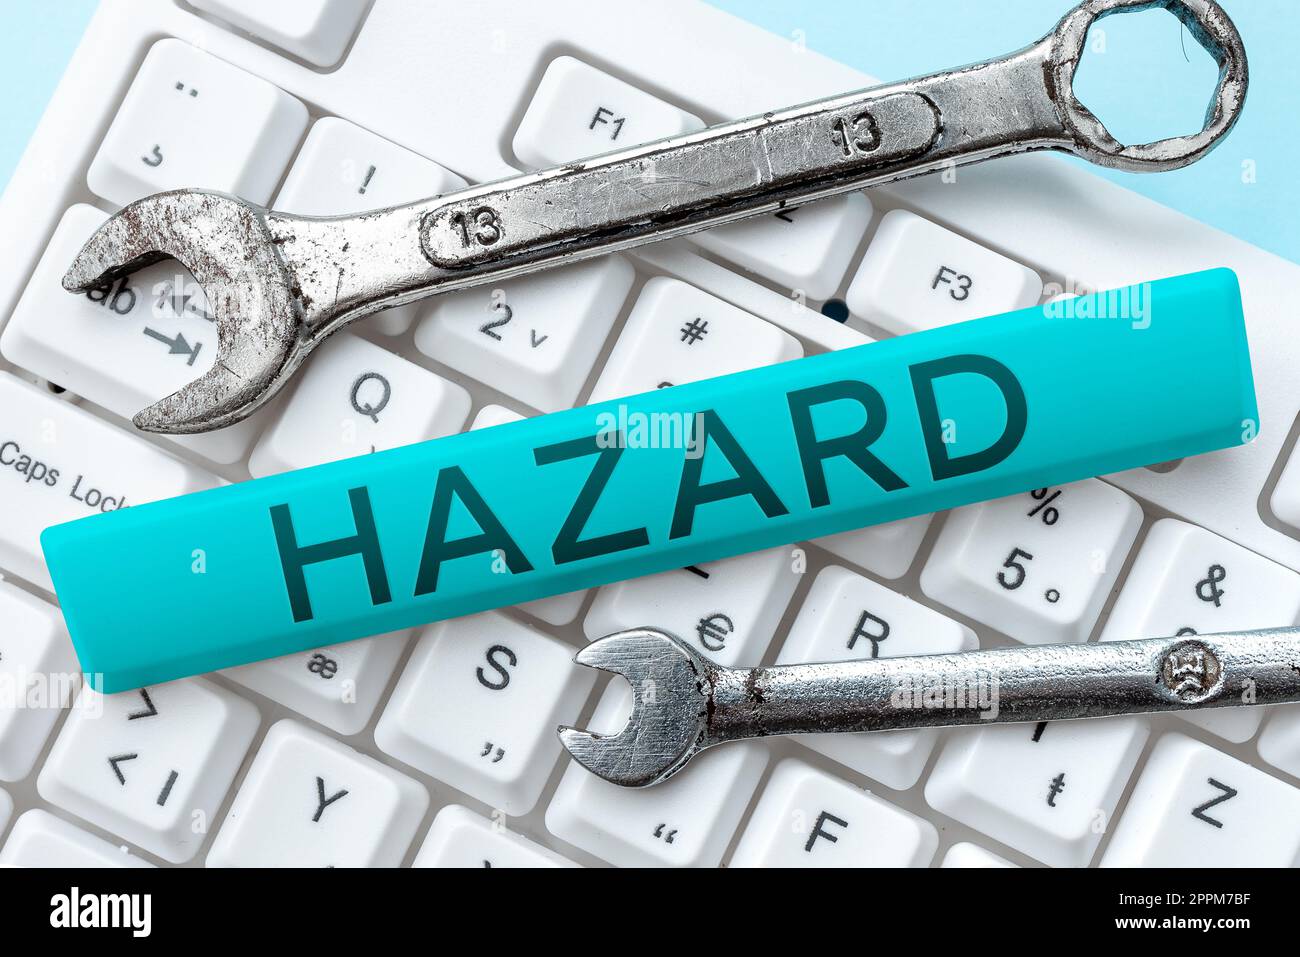 Sign displaying Hazard. Business concept account or statement describing the danger or risk Stock Photo